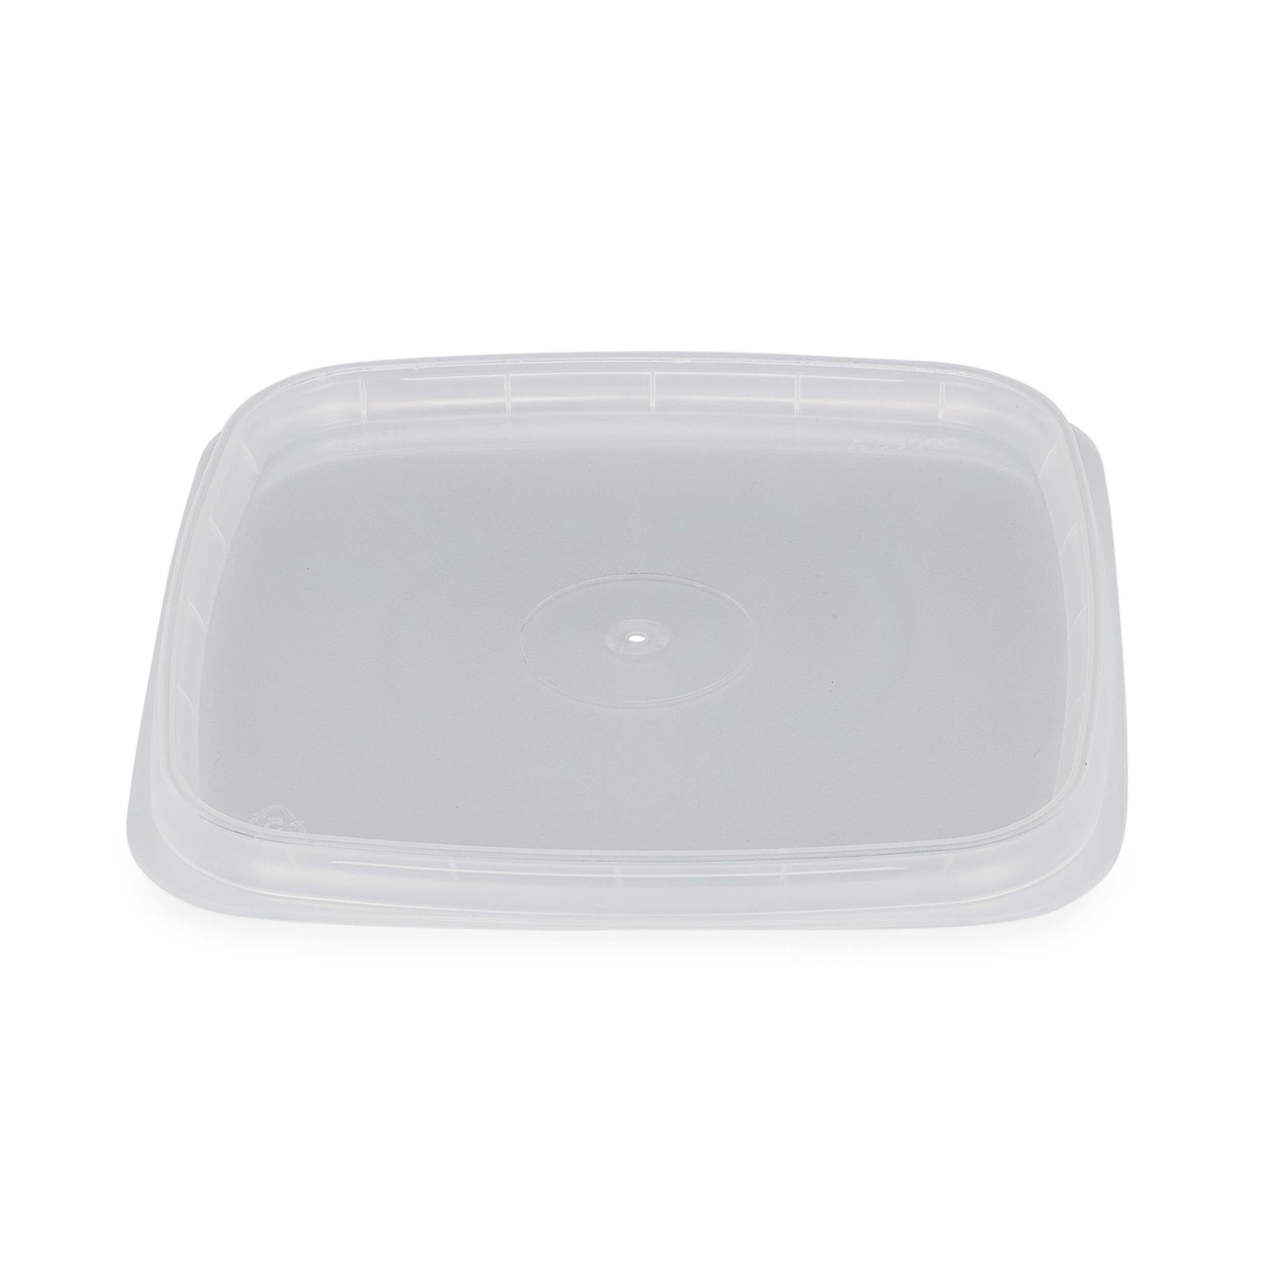 8 oz (250ml) Clear Plastic Square Tamper Evident Container - Illing  Packaging - Packaging Specialist, Plastic Bottles, Metal Containers, Pails & Jerrycans